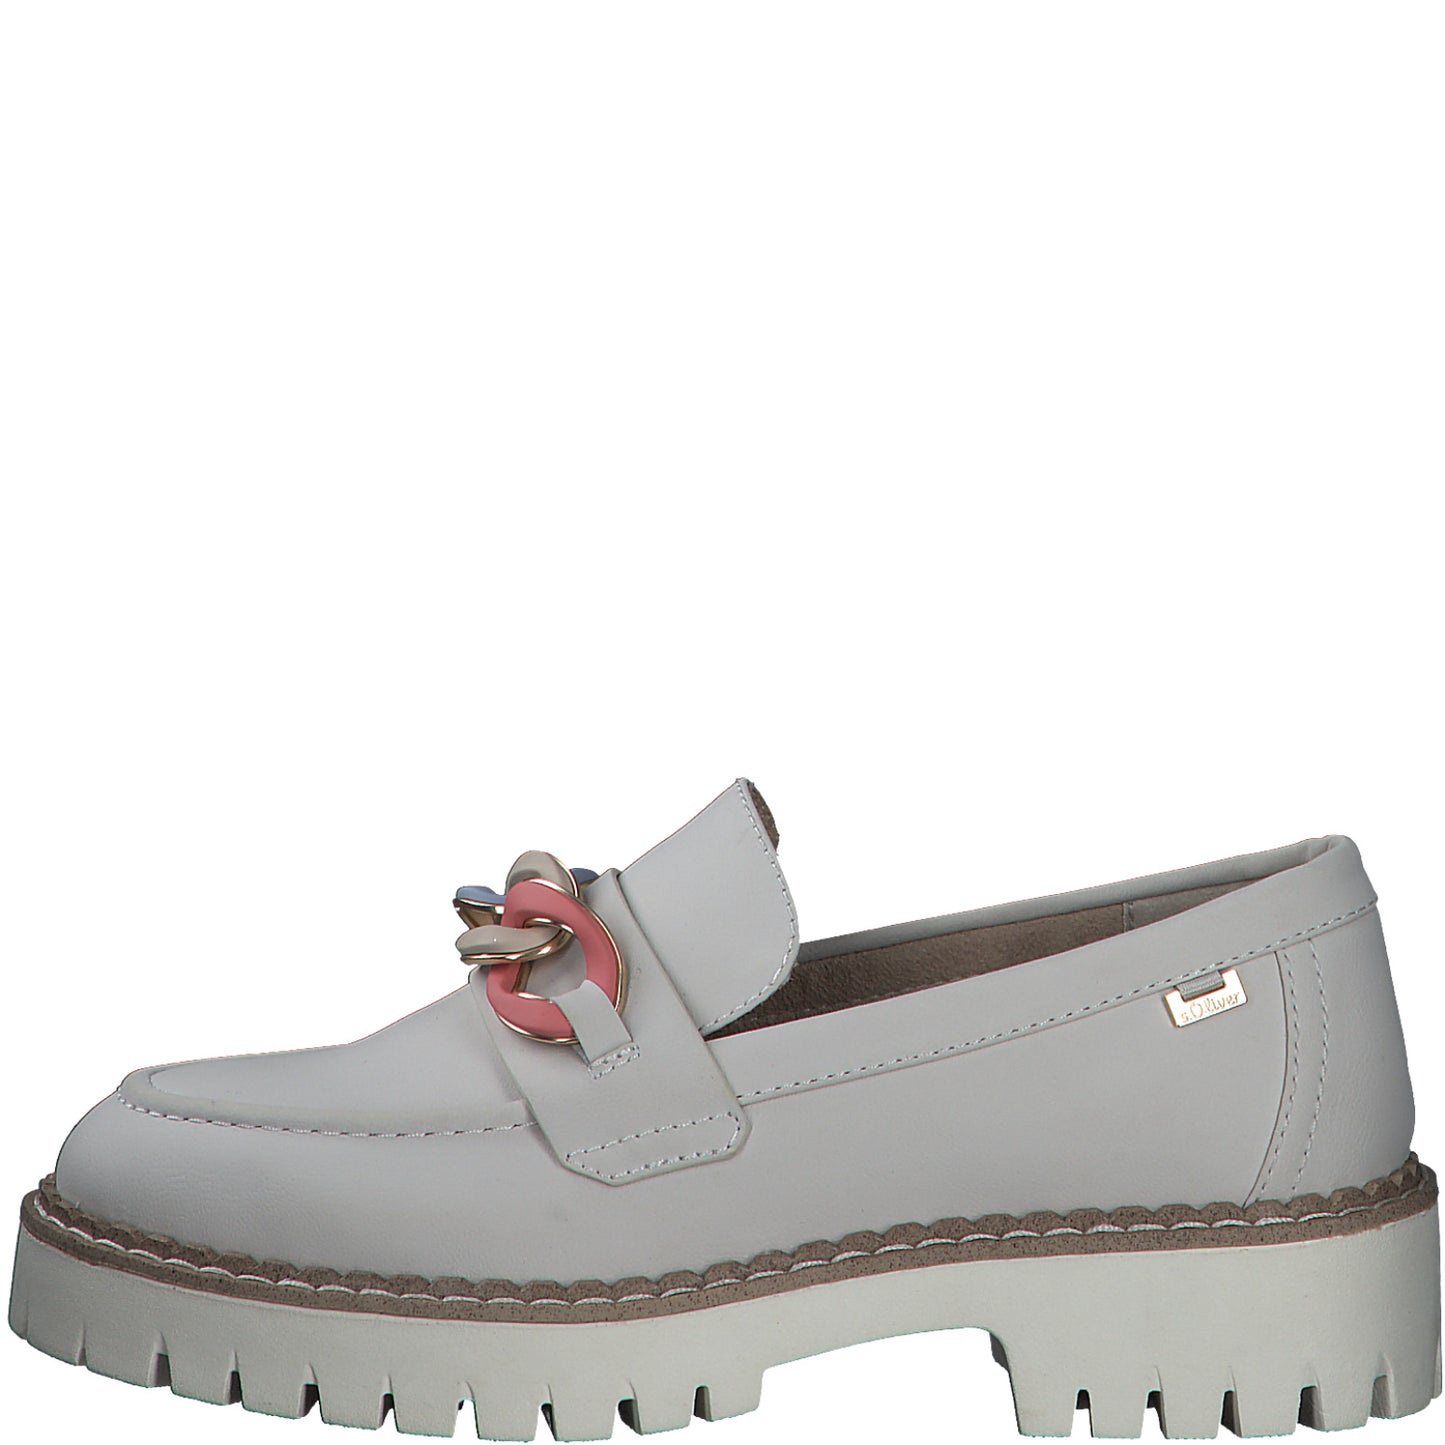 S.oliver - Ladies Shoes Loafers Cream (2086)